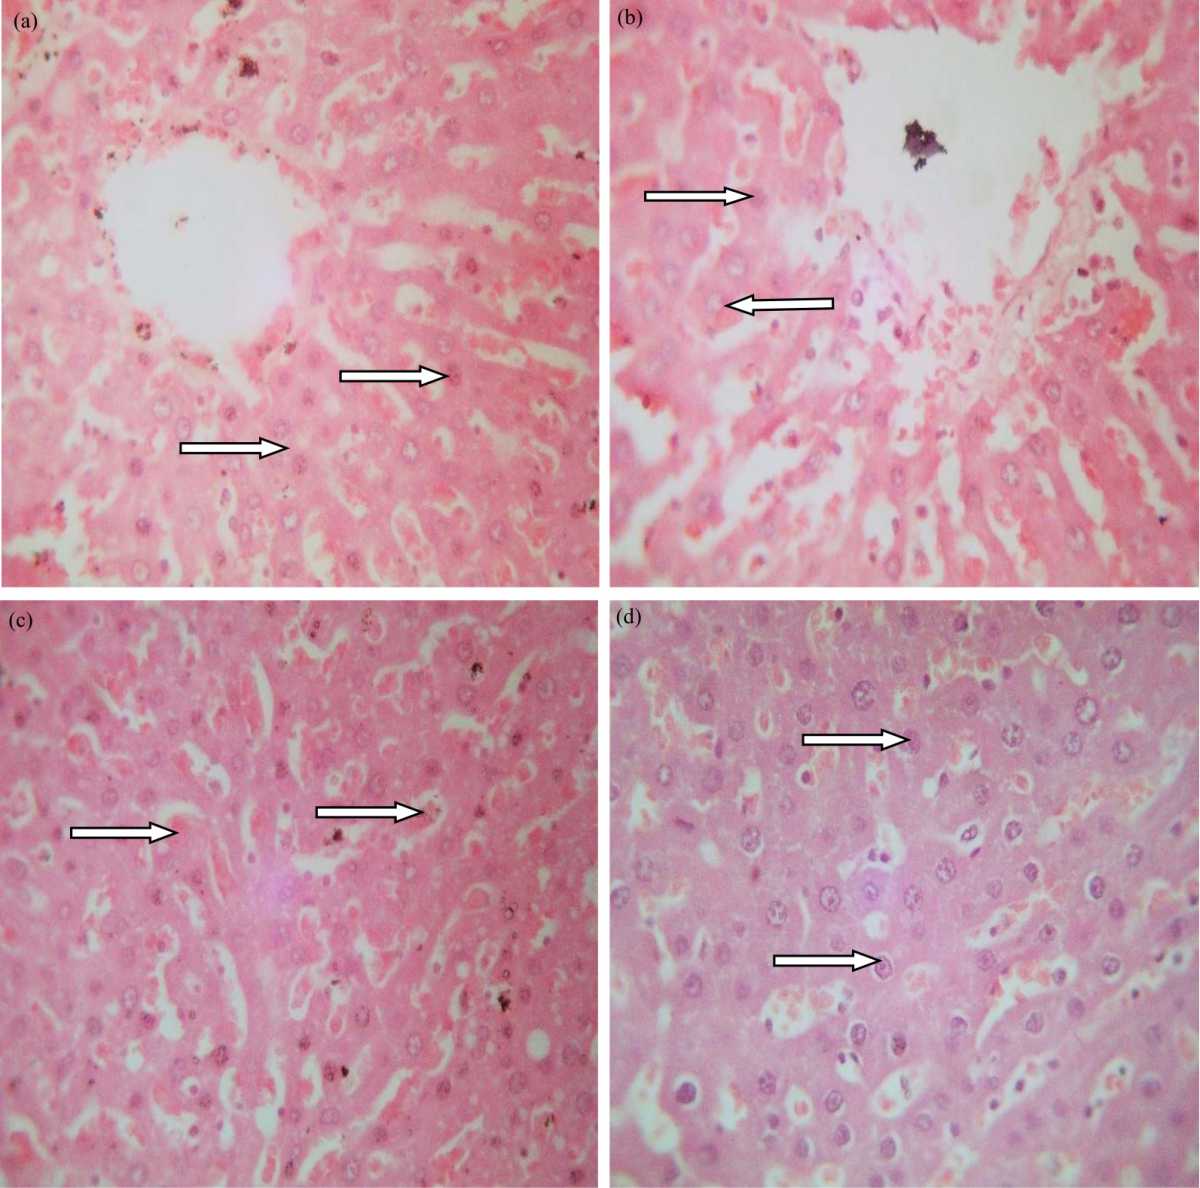 Image for - Ethanolic Leaf Extract of Ocimum gratissimum Abrogates Methotrexate-induced Liver Injury in Albino Rats